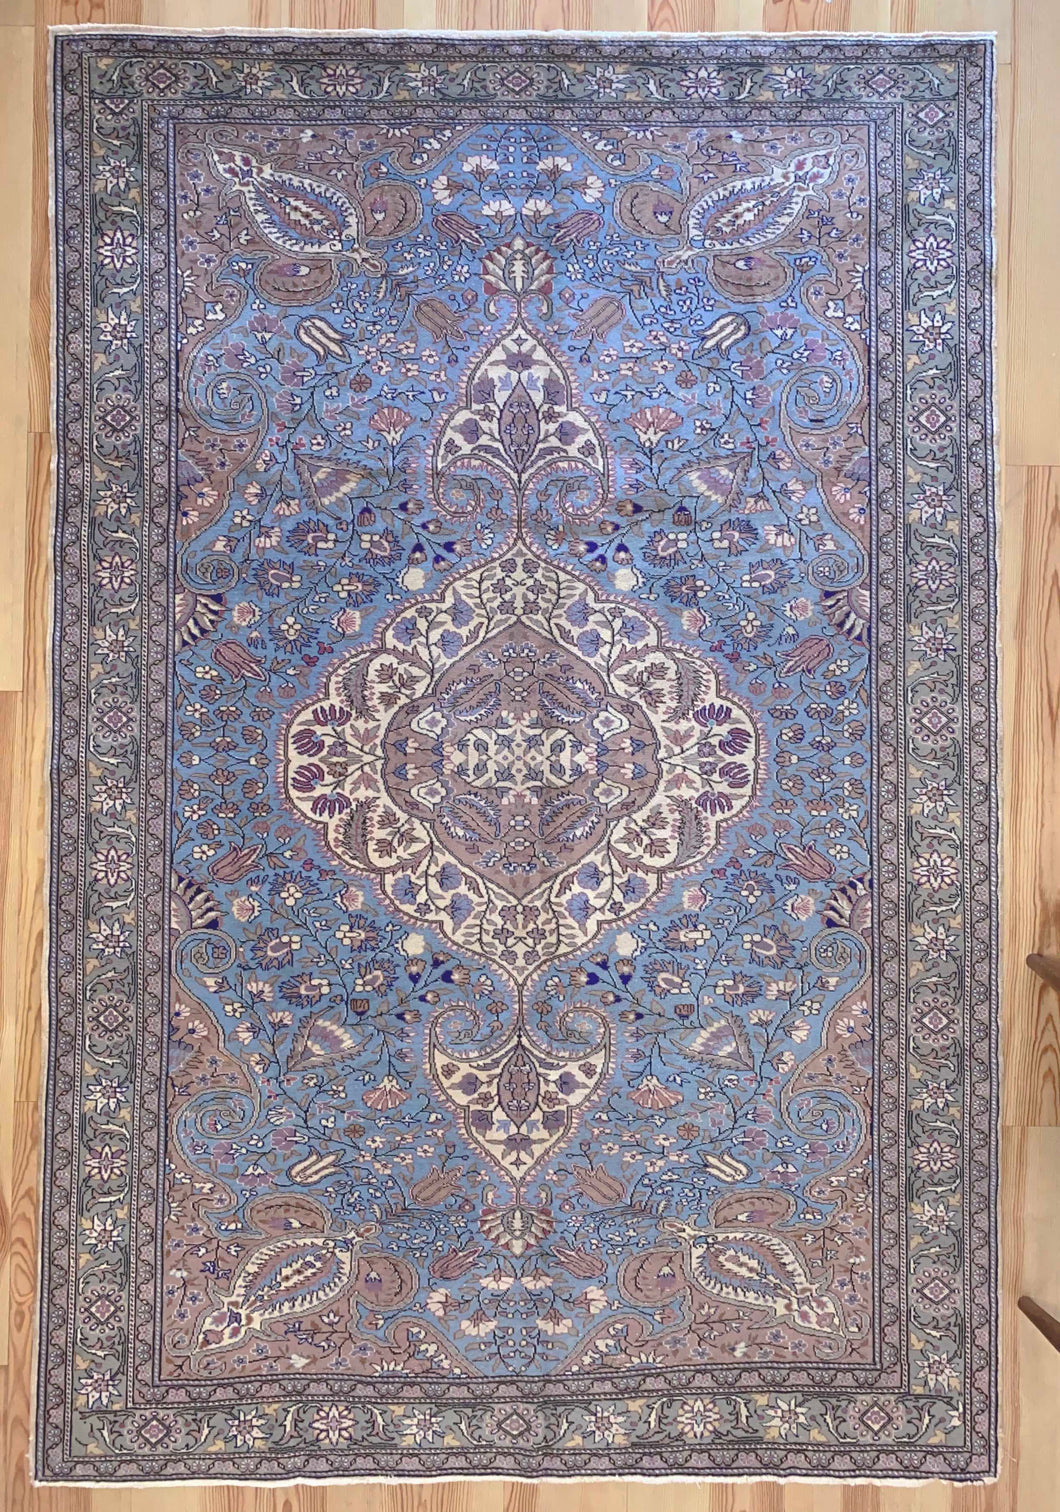 7x10 Vintage Central Anatolian 'Kayseri' Turkish Area Rug | Intricate Bold Medallion Embellished with Palmette and Vine Ornaments Placed on Floral Field Stylized Border | SKU 645